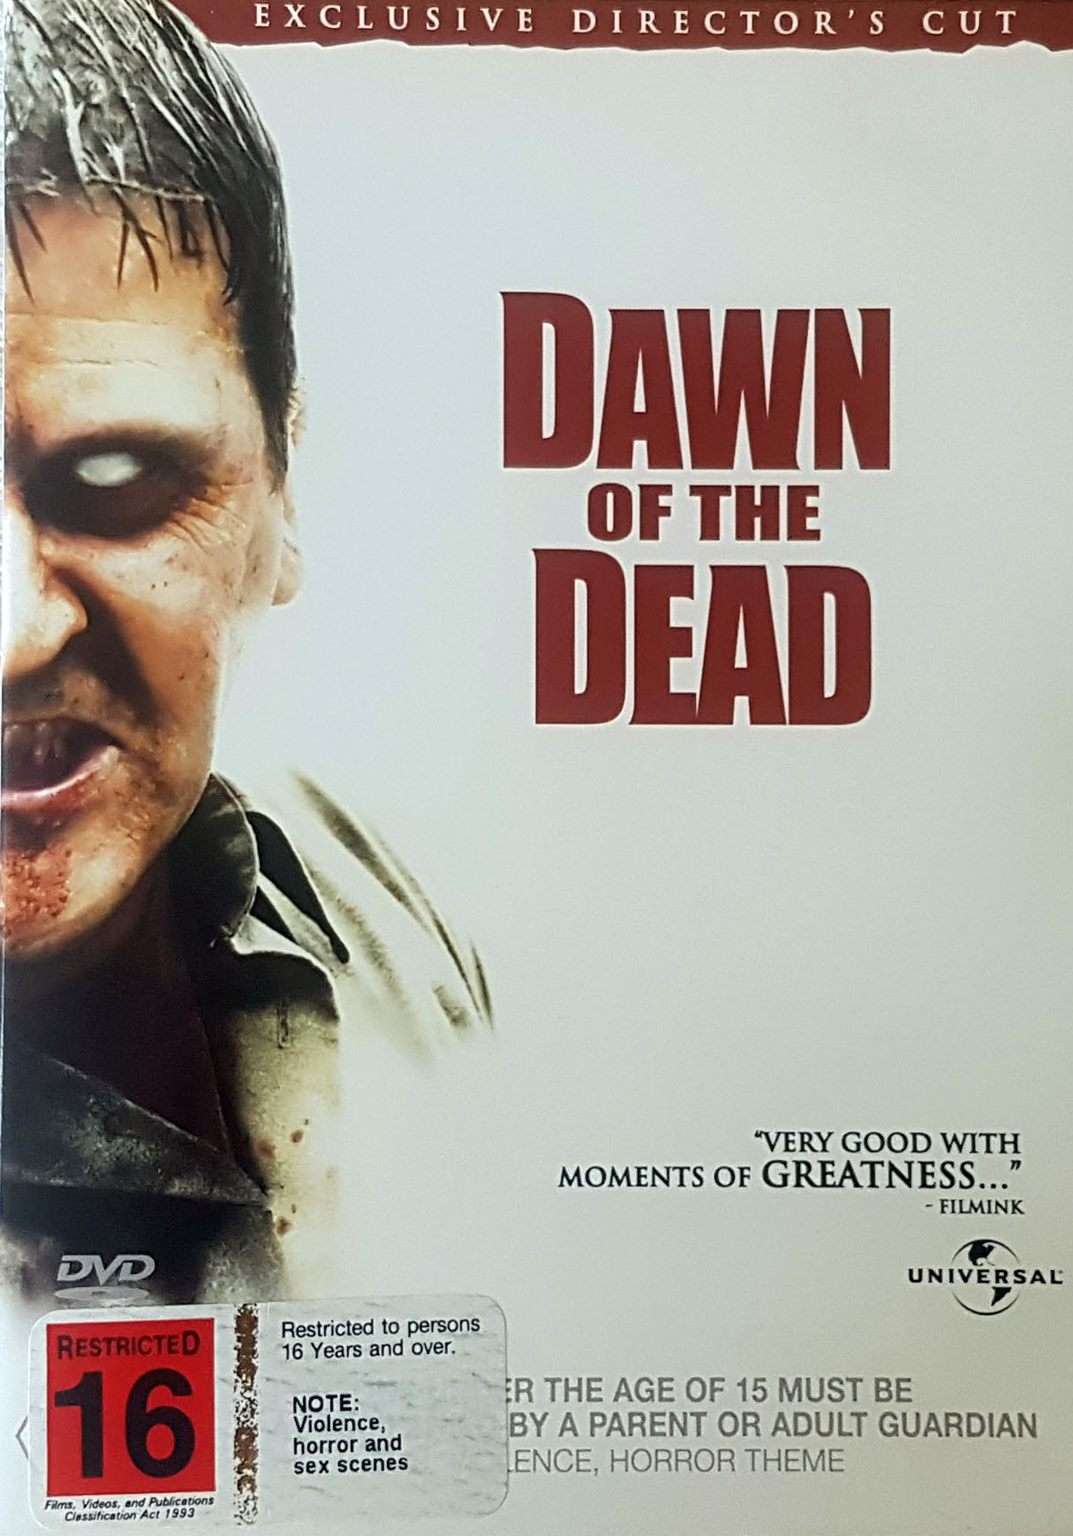 Dawn of The Dead Exclusive Director's Cut